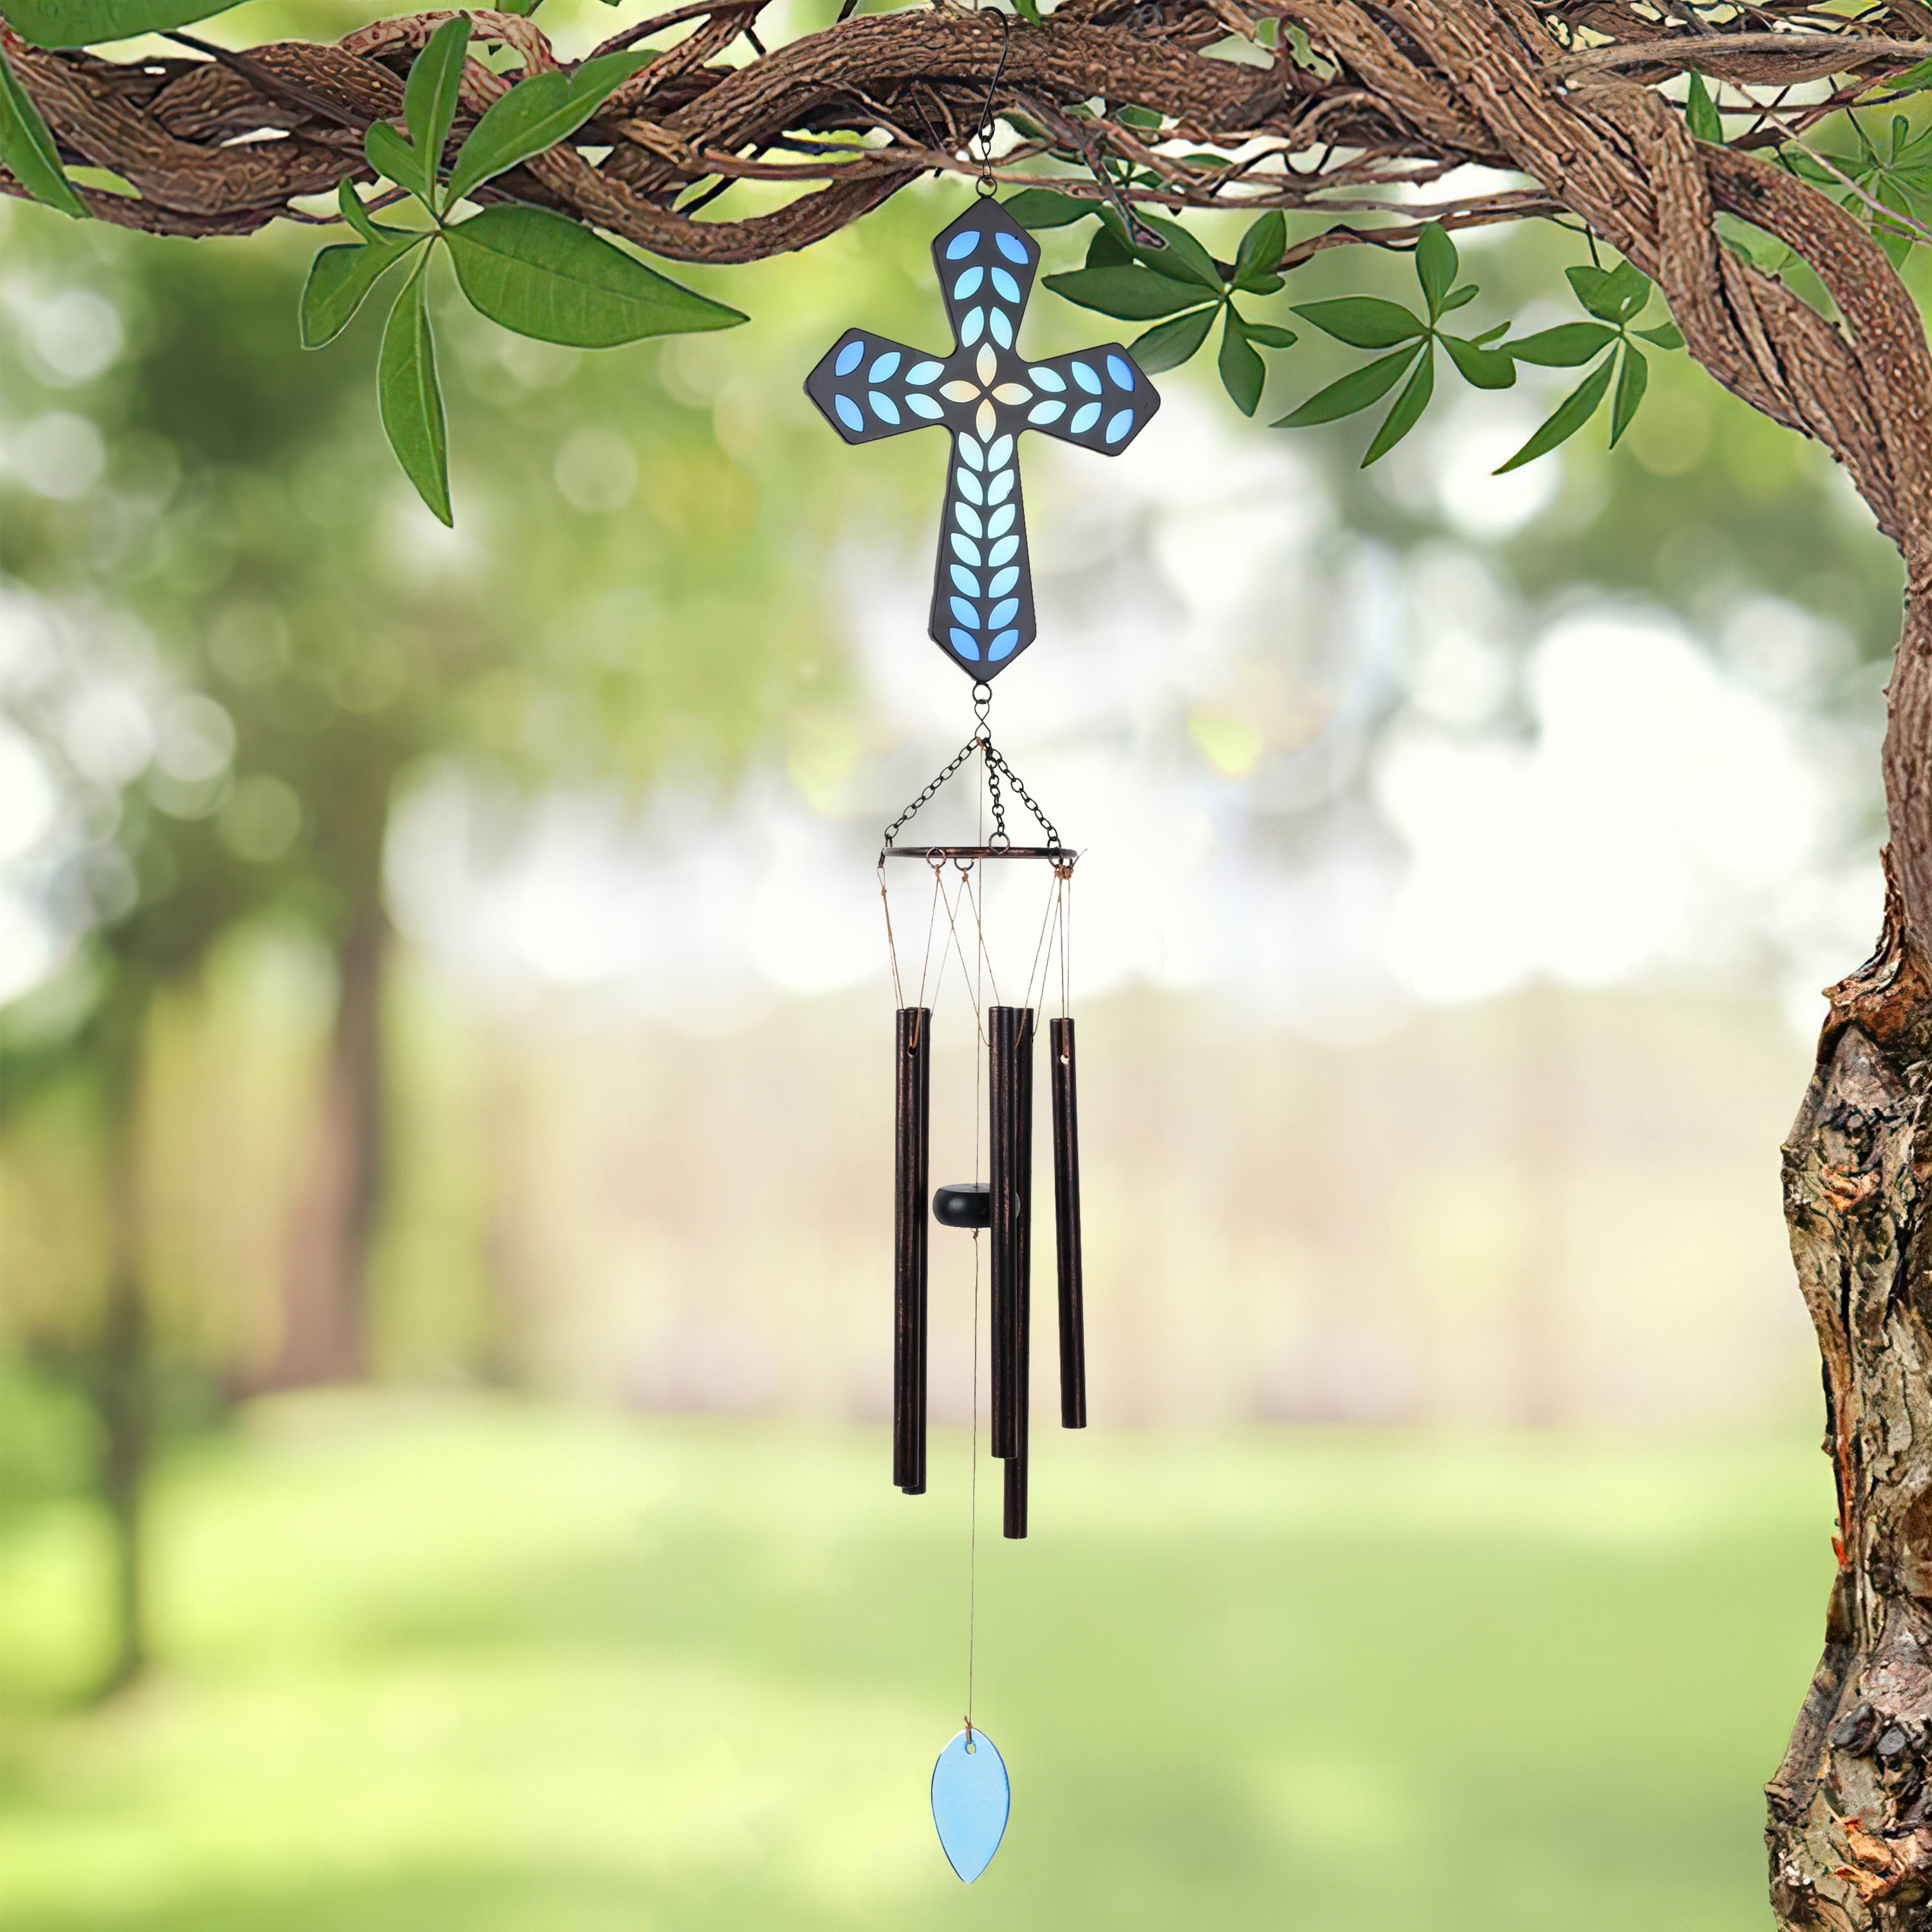 Metal Wind Chime Yard Home Garden Decor Hanging Decors 8 Types Ornaments Craft 